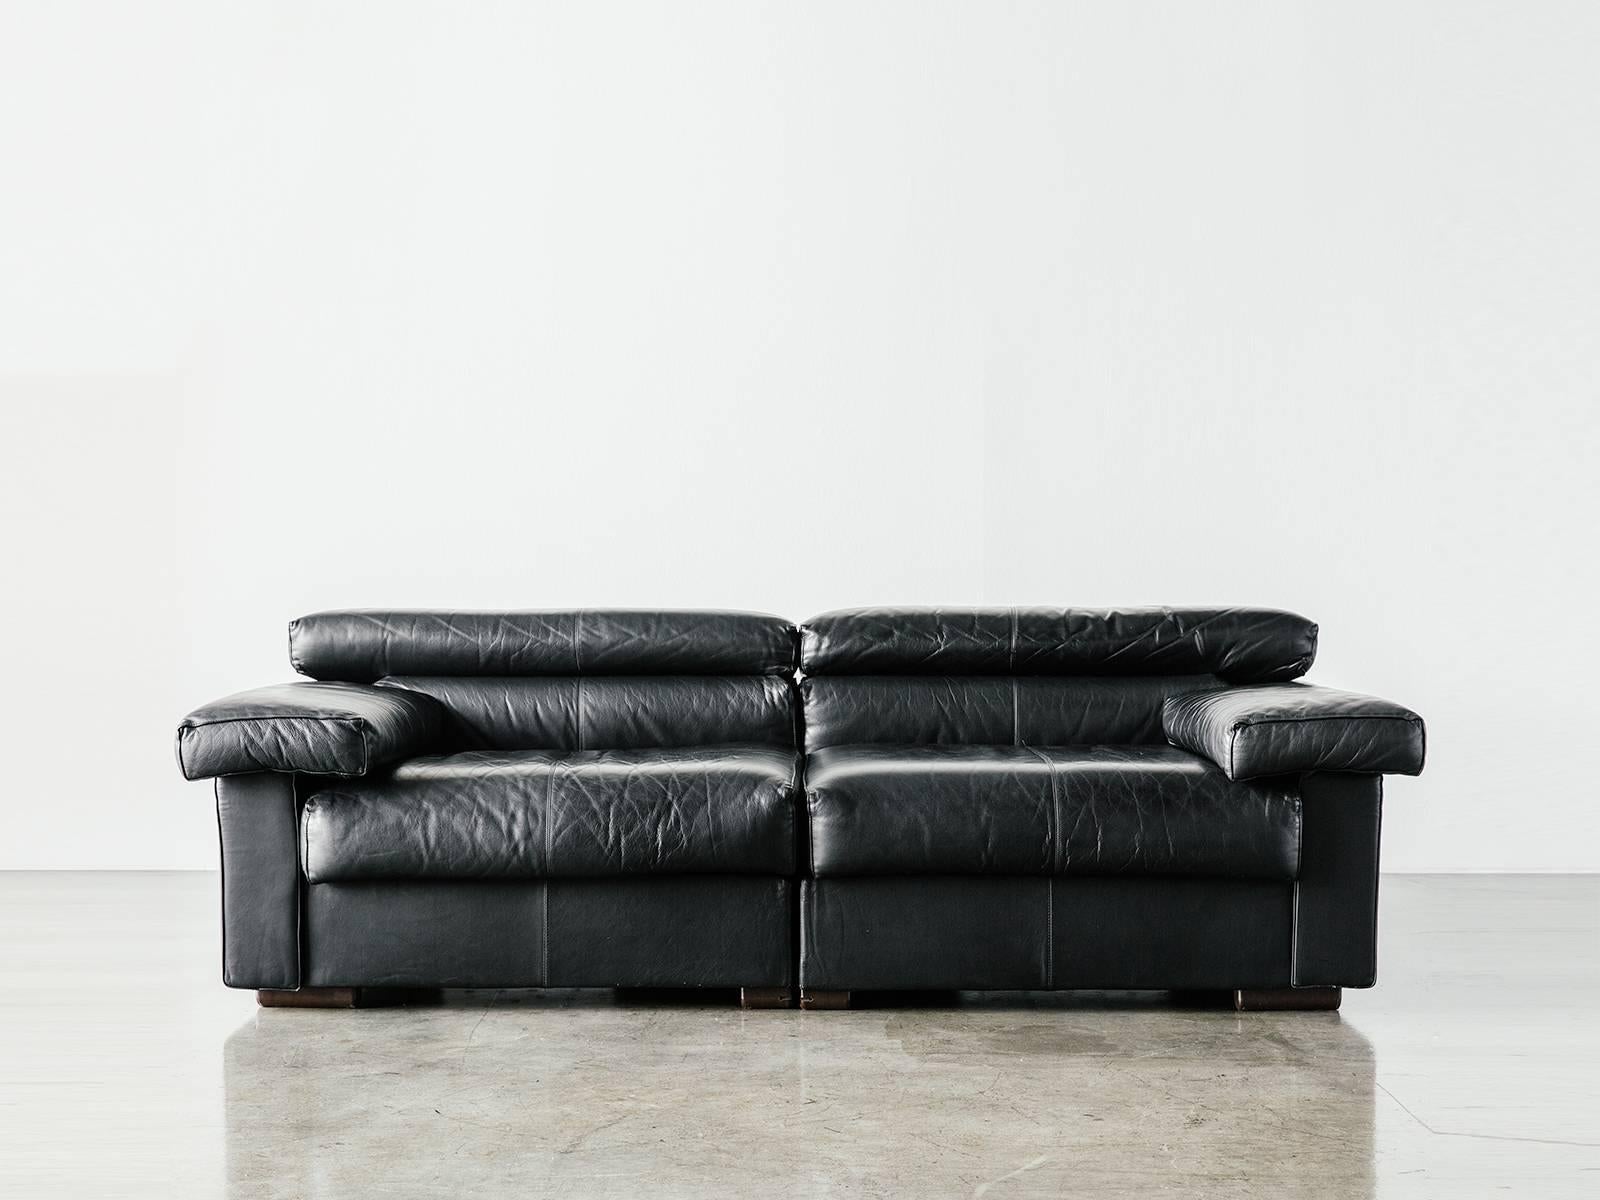 Comfortable and adaptable 2-seat sectional sofa configuration. The sofa is derived from the Scarpas' exploration in the early '70s of the new, more casual, domestic environment the day, resulting in a design that emphasizes the contrast between the